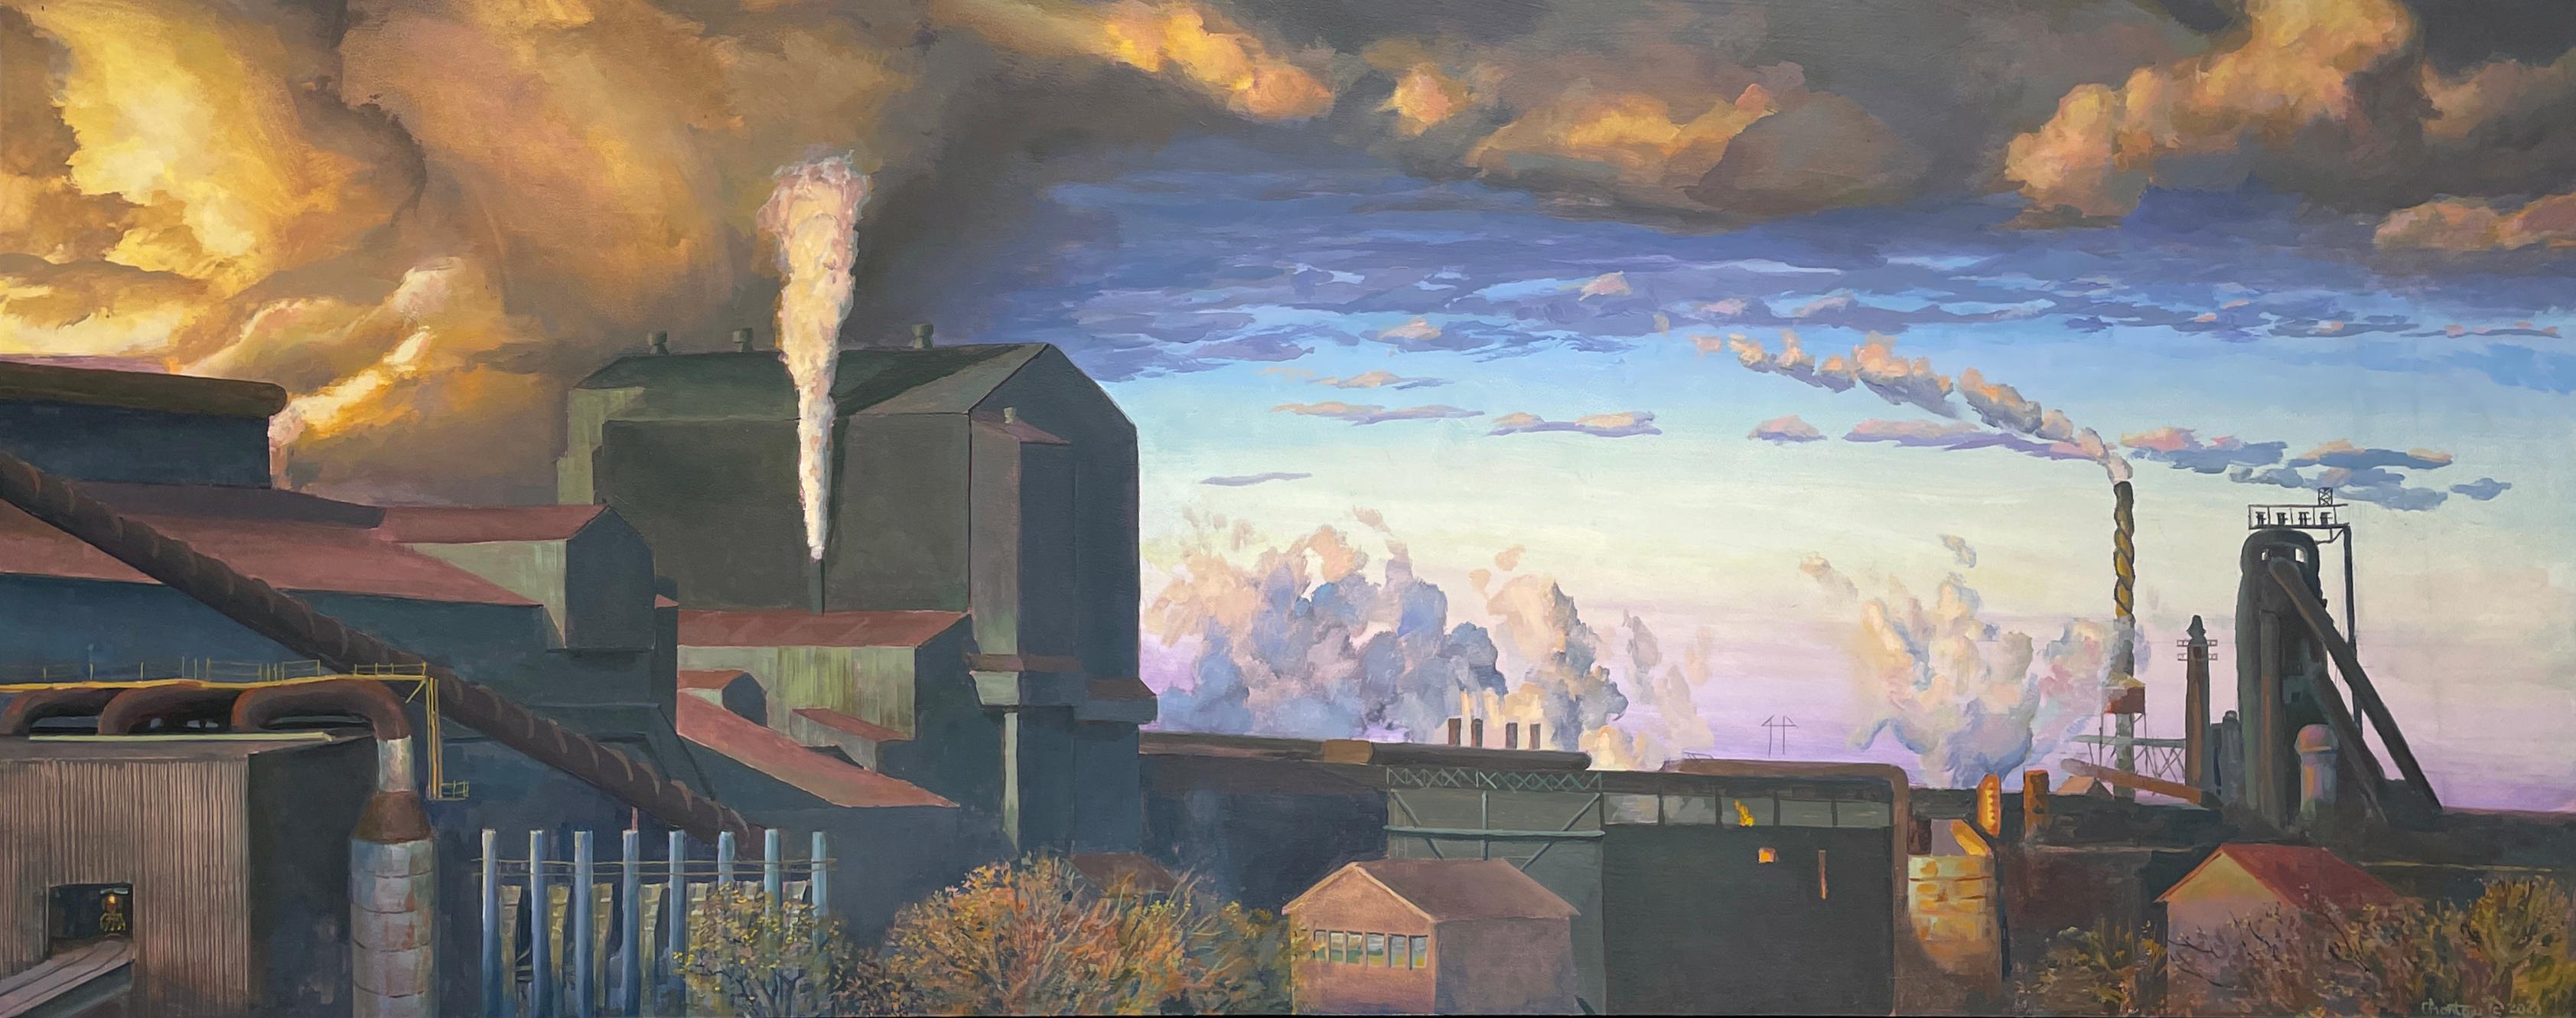 Art Chartow Landscape Painting -  Steel Mills of Gary - Urban Industrial Landscape, Factories with Dramatic Sky